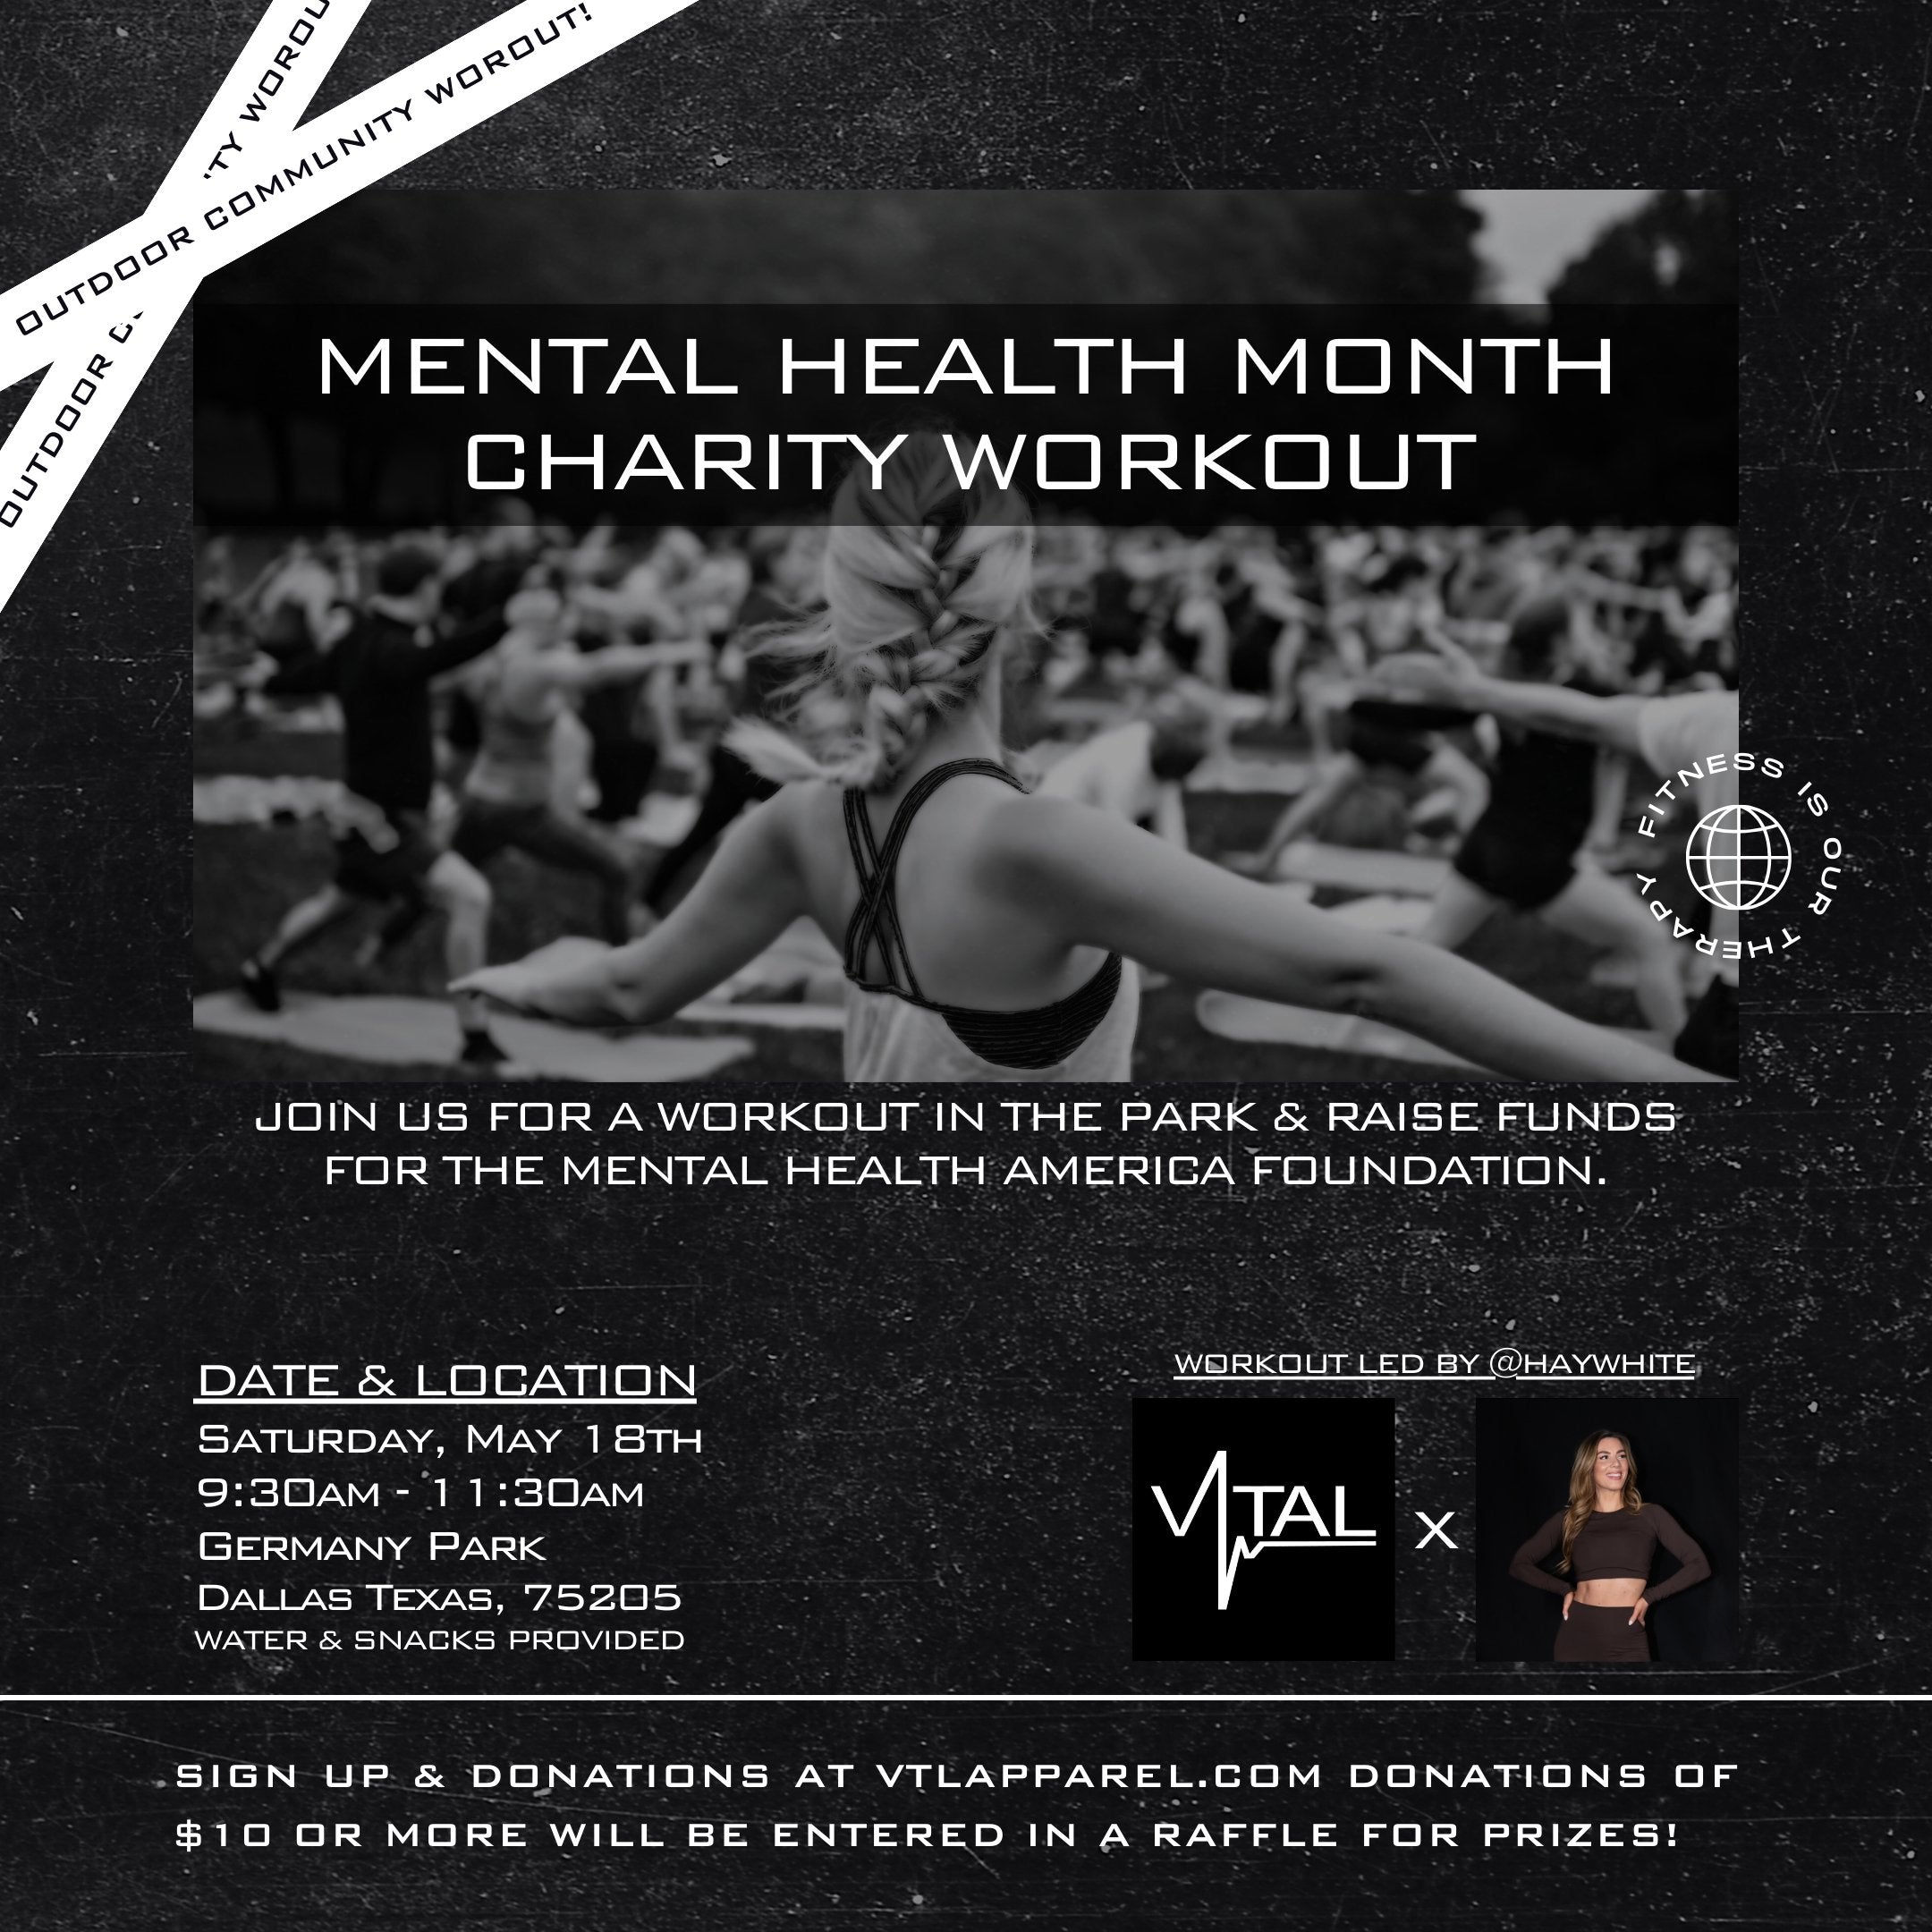 Mental Health Month Charity Workout May 18th Germany Park Dallas, TX - VITAL APPAREL